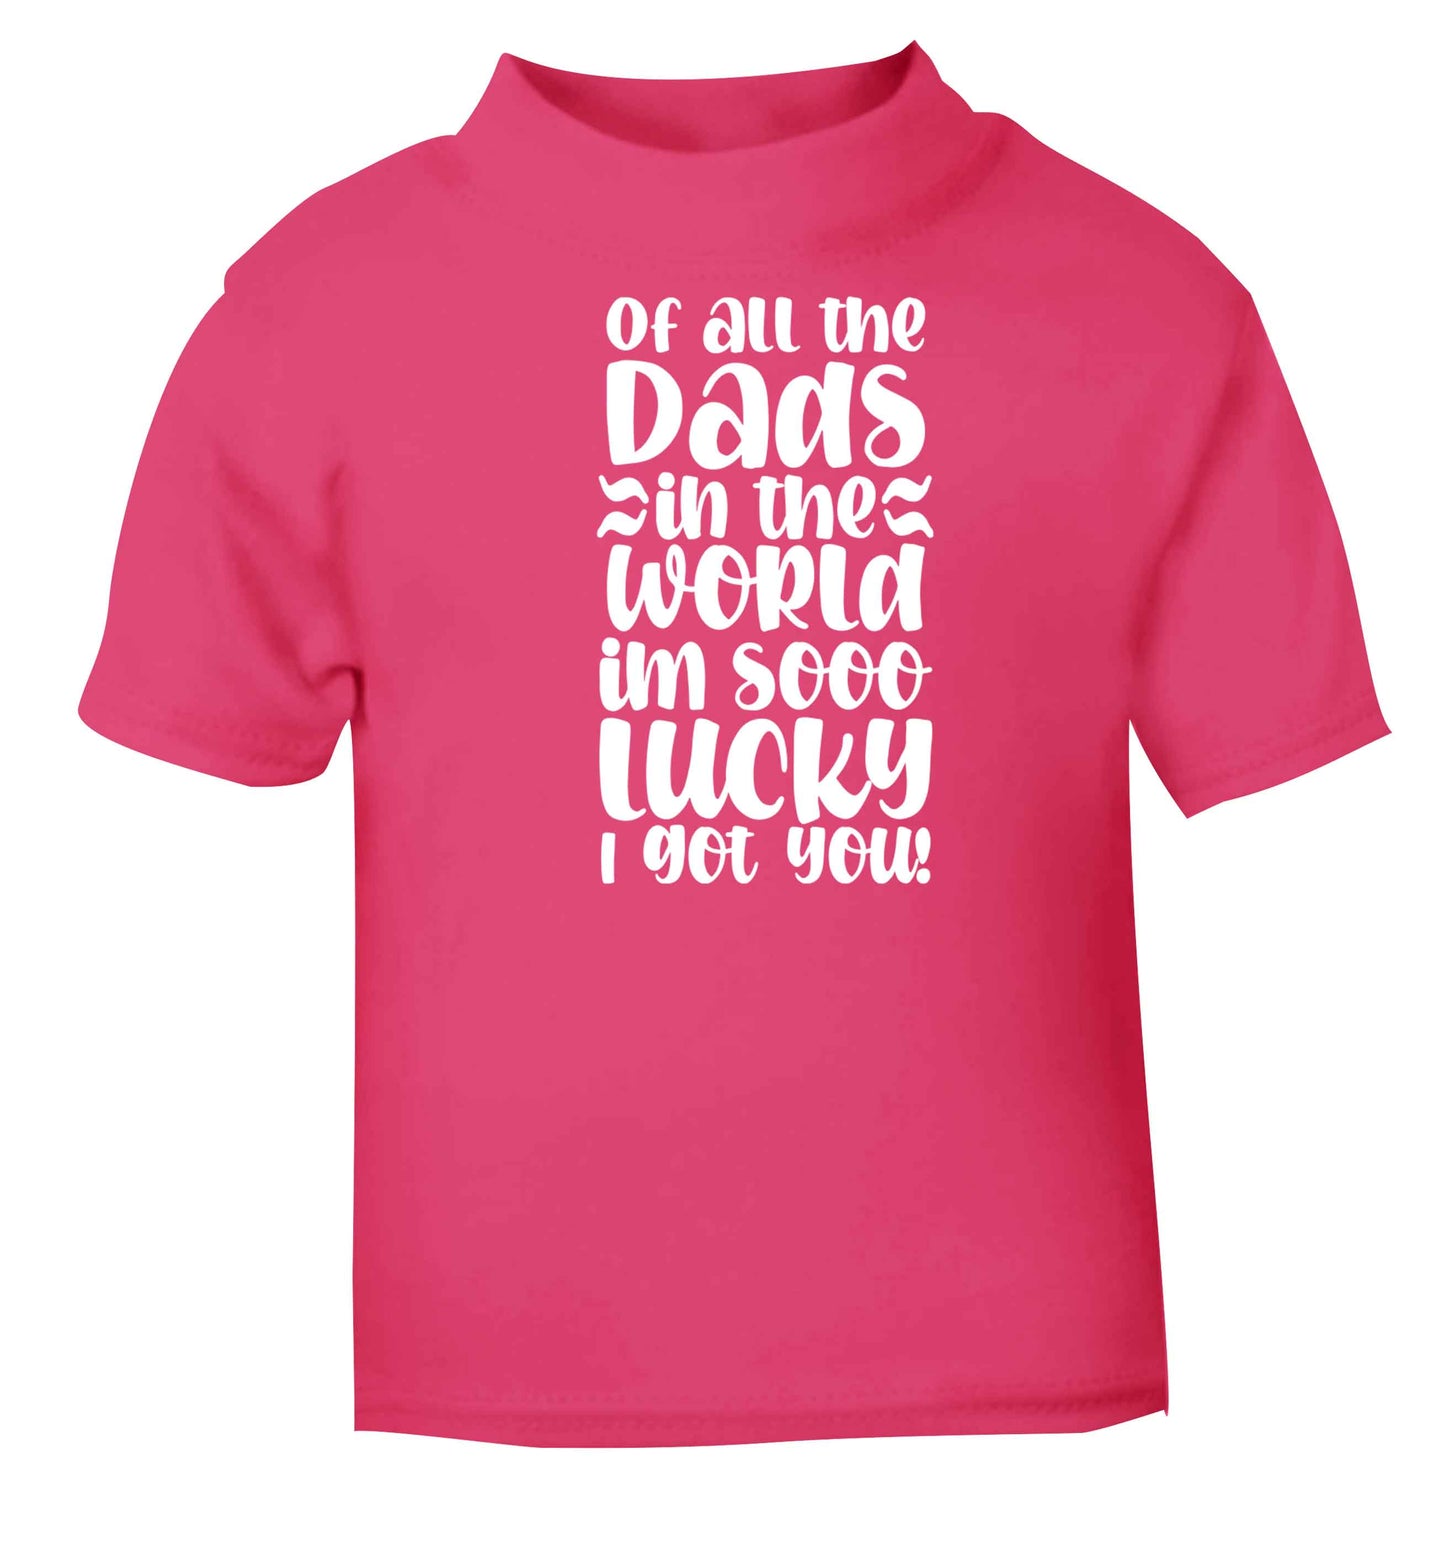 I'm as lucky as can be the worlds greatest dad belongs to me! pink baby toddler Tshirt 2 Years